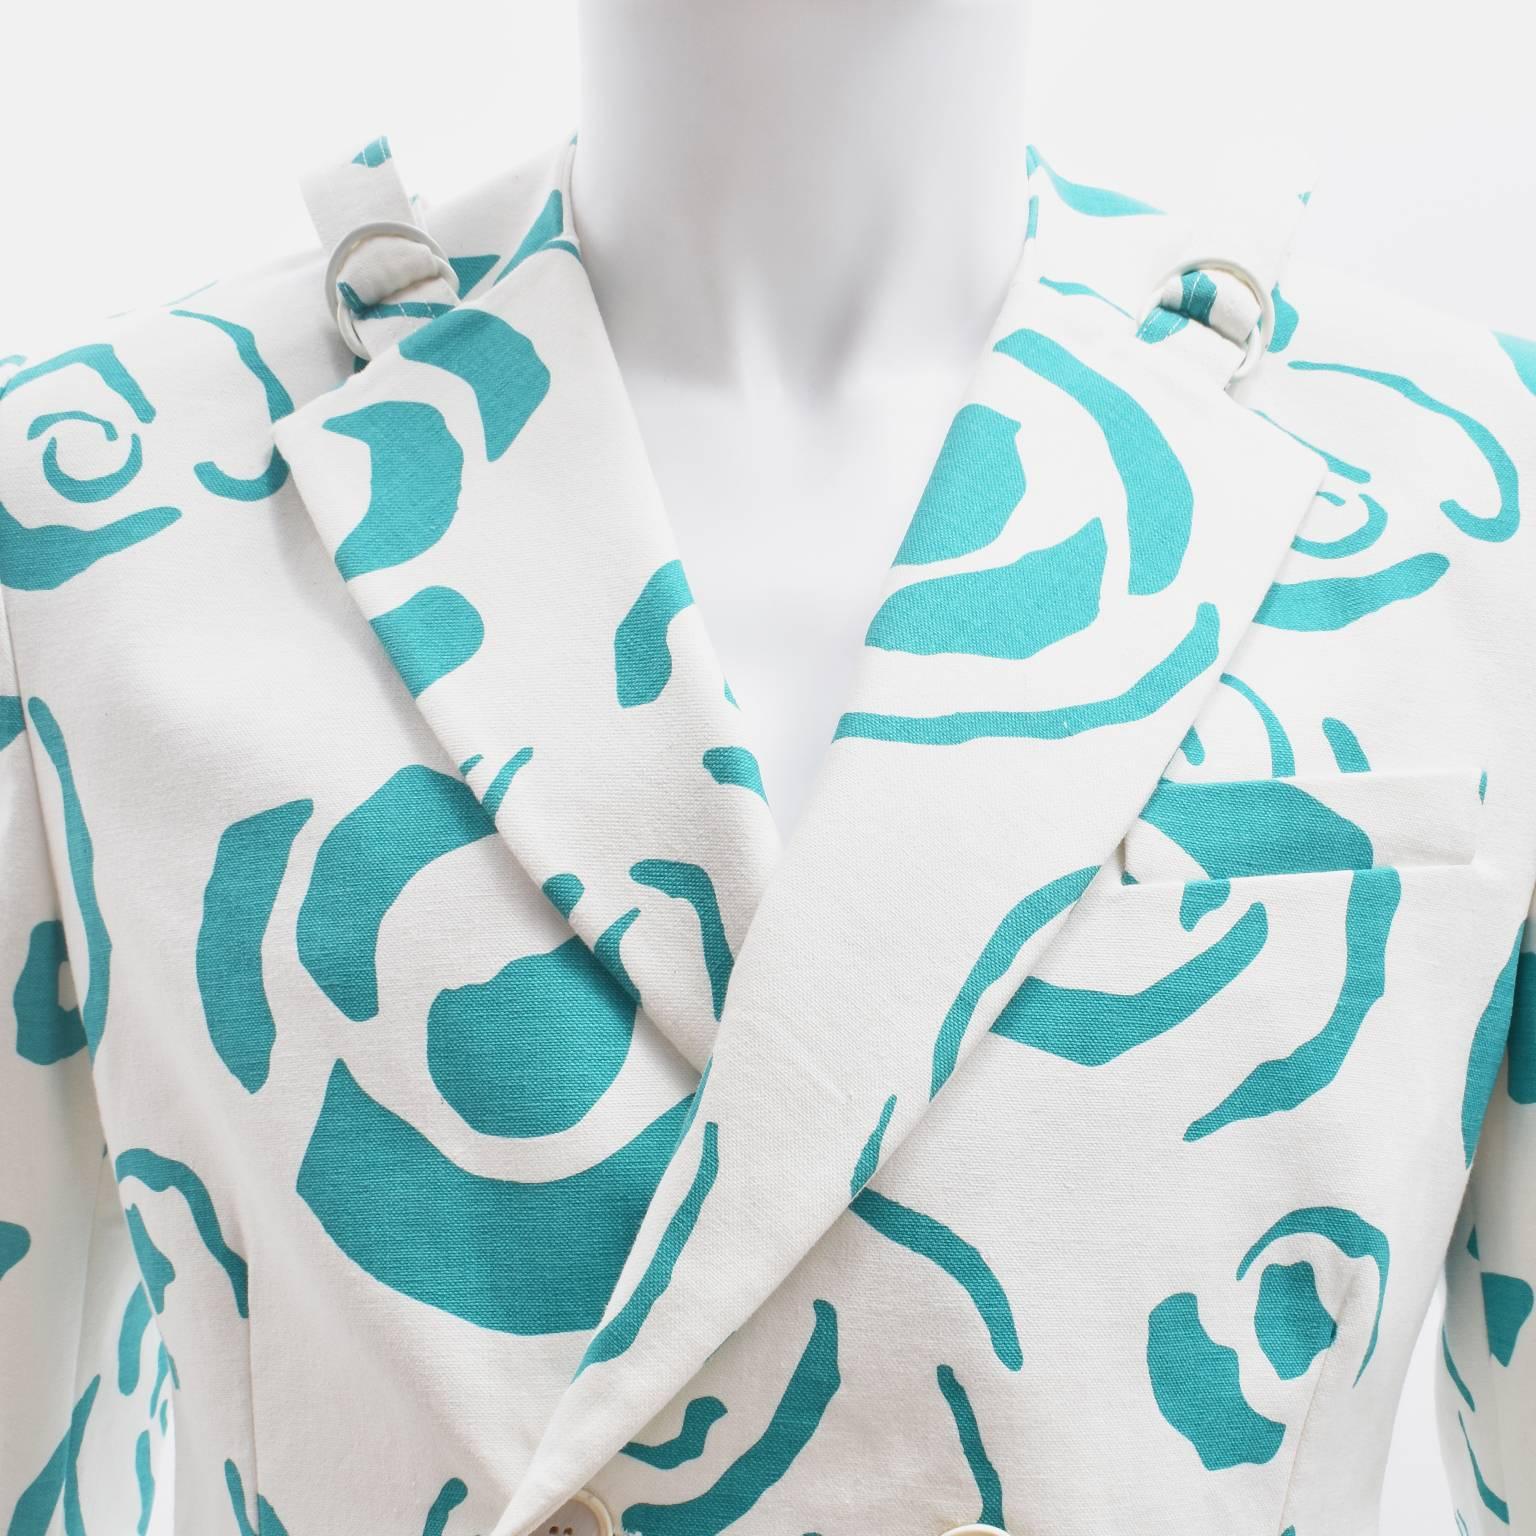 A white double breasted jacket with an all-over turquoise green rose print by British designer J.W. Anderson. The jacket has a classic double-breasted design with four buttons, two pockets at the hip and a boxy silhouette. However, the collar